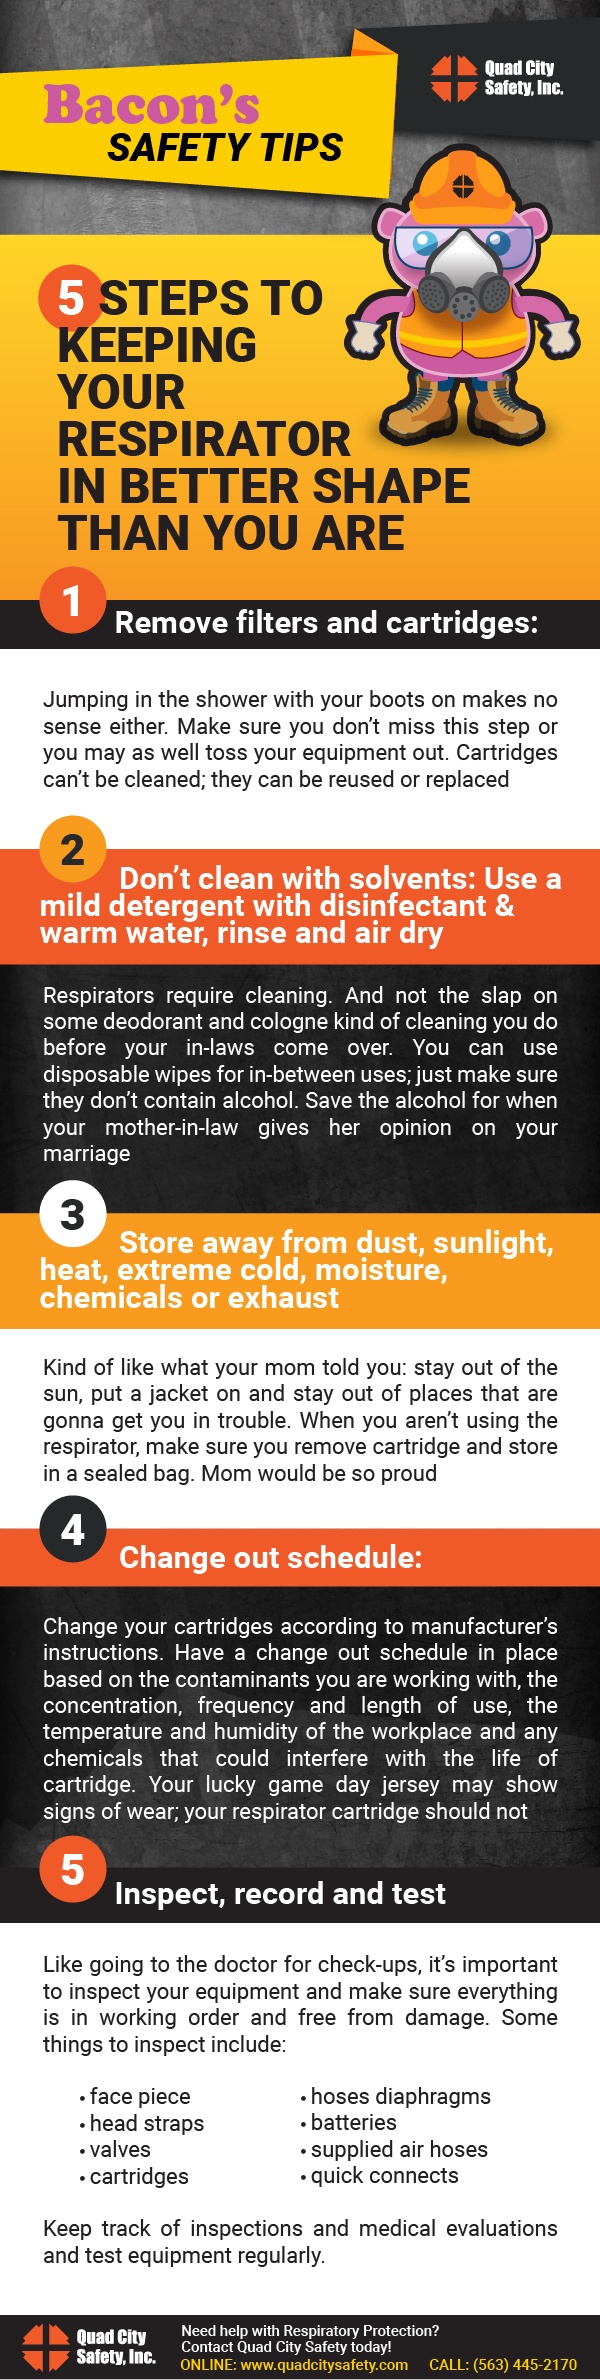 Bacon's Safety Tips 5 Steps to Keeping Your Respirator in Better Shape than You are 1. Remove filters and cartridges. Jumping in the shower with your boots on makes no sense either. Make sure you didn't miss this step or you may as well toss your equipment out. Cartridges can't be cleaned; they can be reused or replaces. 2. Don't clean with solvents: Use a mild detergent with disinfectant and warm water, rinse and air dry. Respirators require cleaning. And not the slap on some deoderant and cologne kind of cleaning you do before your in-laws come over. You can use disposable wipes for in-between uses; just make sure they don't contain alcohol. Save the alcohol for when your mother-in-law gives her opinion on your marriage. 3. Store away from dust, sunlight, heat, extreme cold, moisture, chemicals or exhaust. Kind of like what your mom told you: stay out of the sun, put a jacket on and stay out of places that are gonna get you in trouble. When you aren't using the respirator, make sure you remove the cartridge and store it in a sealed bag. Mom would be proud. 4. Change out schedule: Change your cartridges according to manufacturer's instructions. Have a change out schedule in place based on the contaminants you are working with, the concentration, frequency, and legth of use, the temperature and humidity of the workplace, and any chemicals that could interfere with the life of the cartridge. Your lucky game day jersey may show signs of wear; your respirator cartridge should not. 5. Inspect, record and test.  Like going to the doctor for check-ups, it's important to inspect your equipment and make sure everything is in working order and free from damage. Some things to inspect include: facepiece, head straps, valves, cartridges, hose diaphragms, batteries, supplied air hoses, quick connects. Keep track of inspections and medical evaluations and test equipment regularly. 